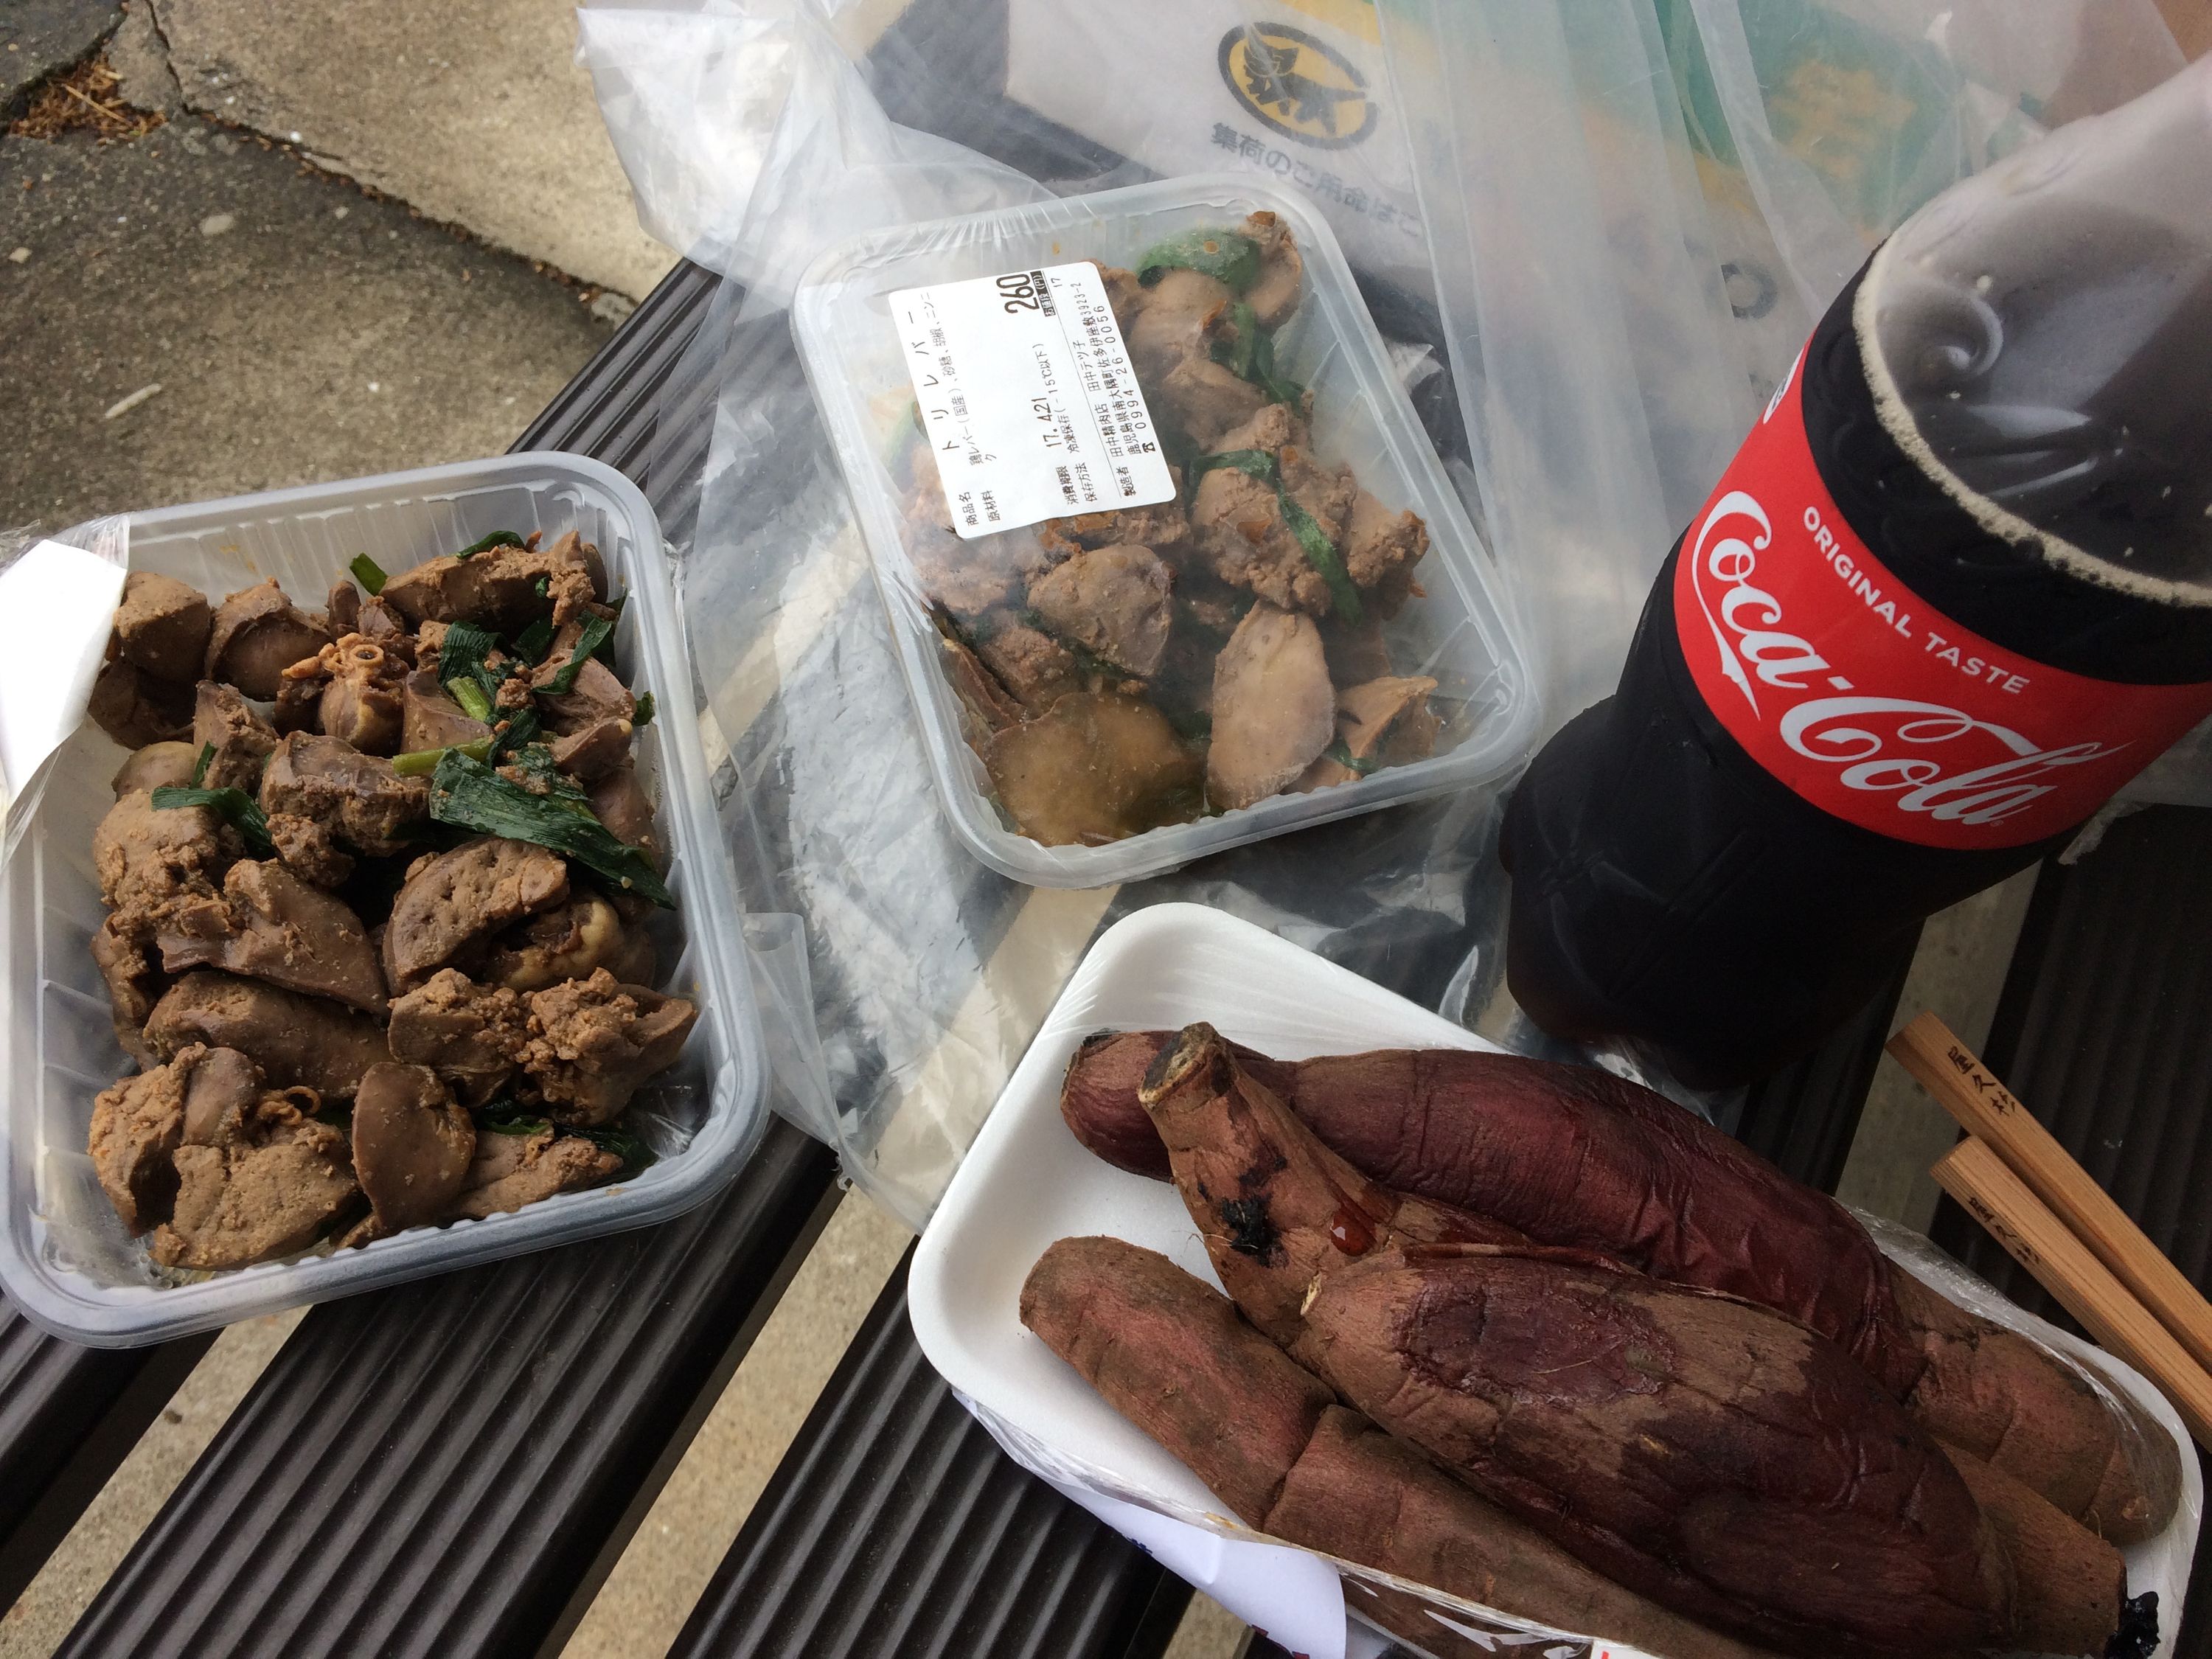 Sautéed livers, baked sweet potatoes, and a bottle of Coke on a bench.